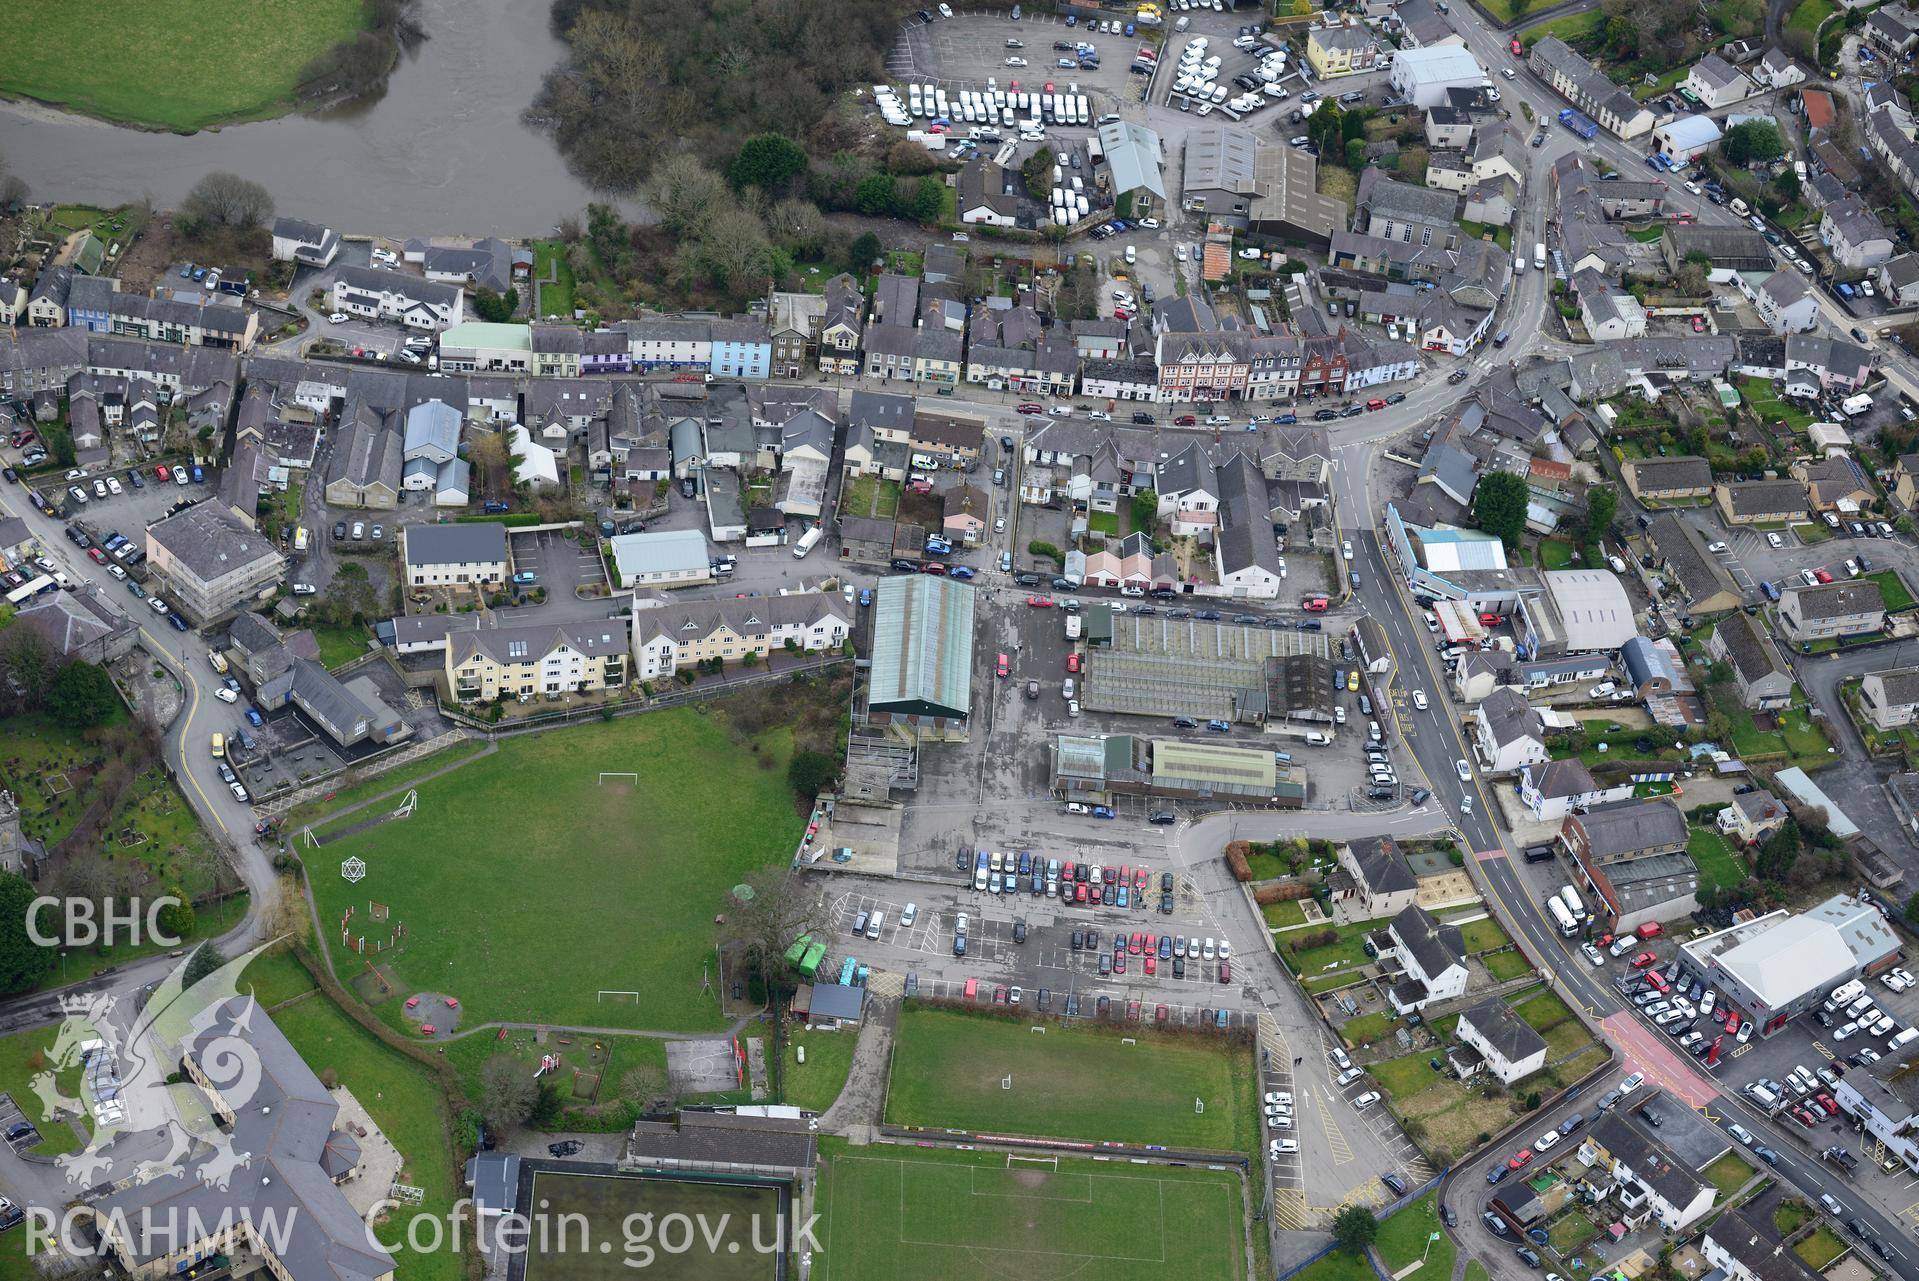 Newcastle Emlyn livestock market, Newcastle Emlyn. Oblique aerial photograph taken during the Royal Commission's programme of archaeological aerial reconnaissance by Toby Driver on 13th March 2015.